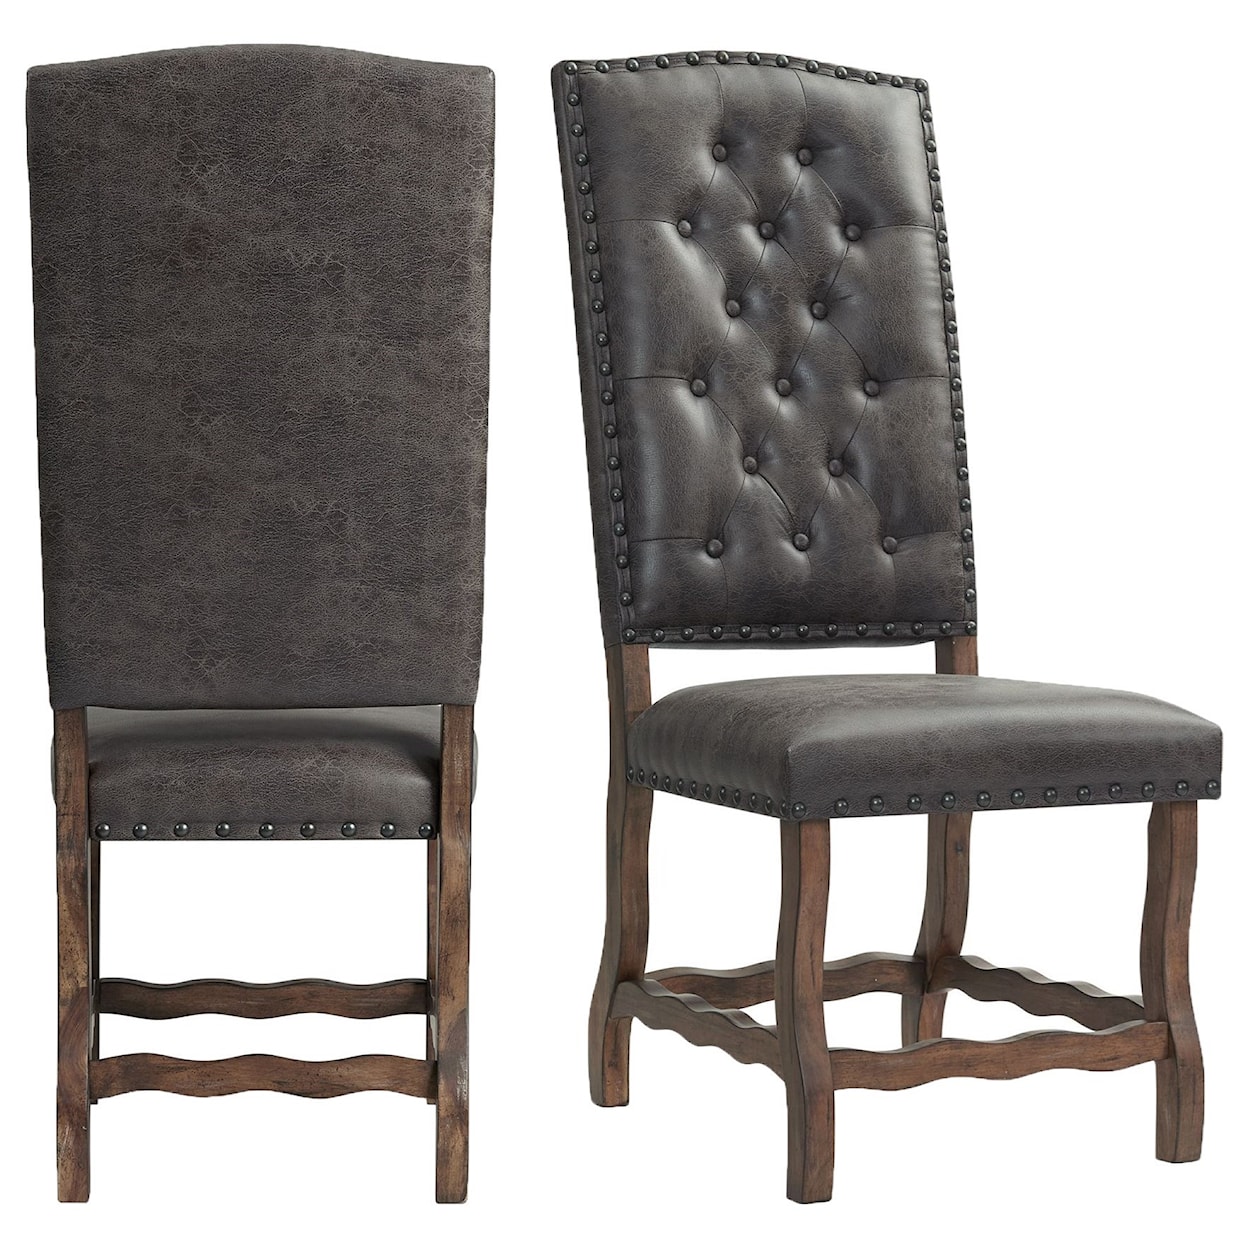 Elements International Gramercy Tufted Tall Back Side Chair